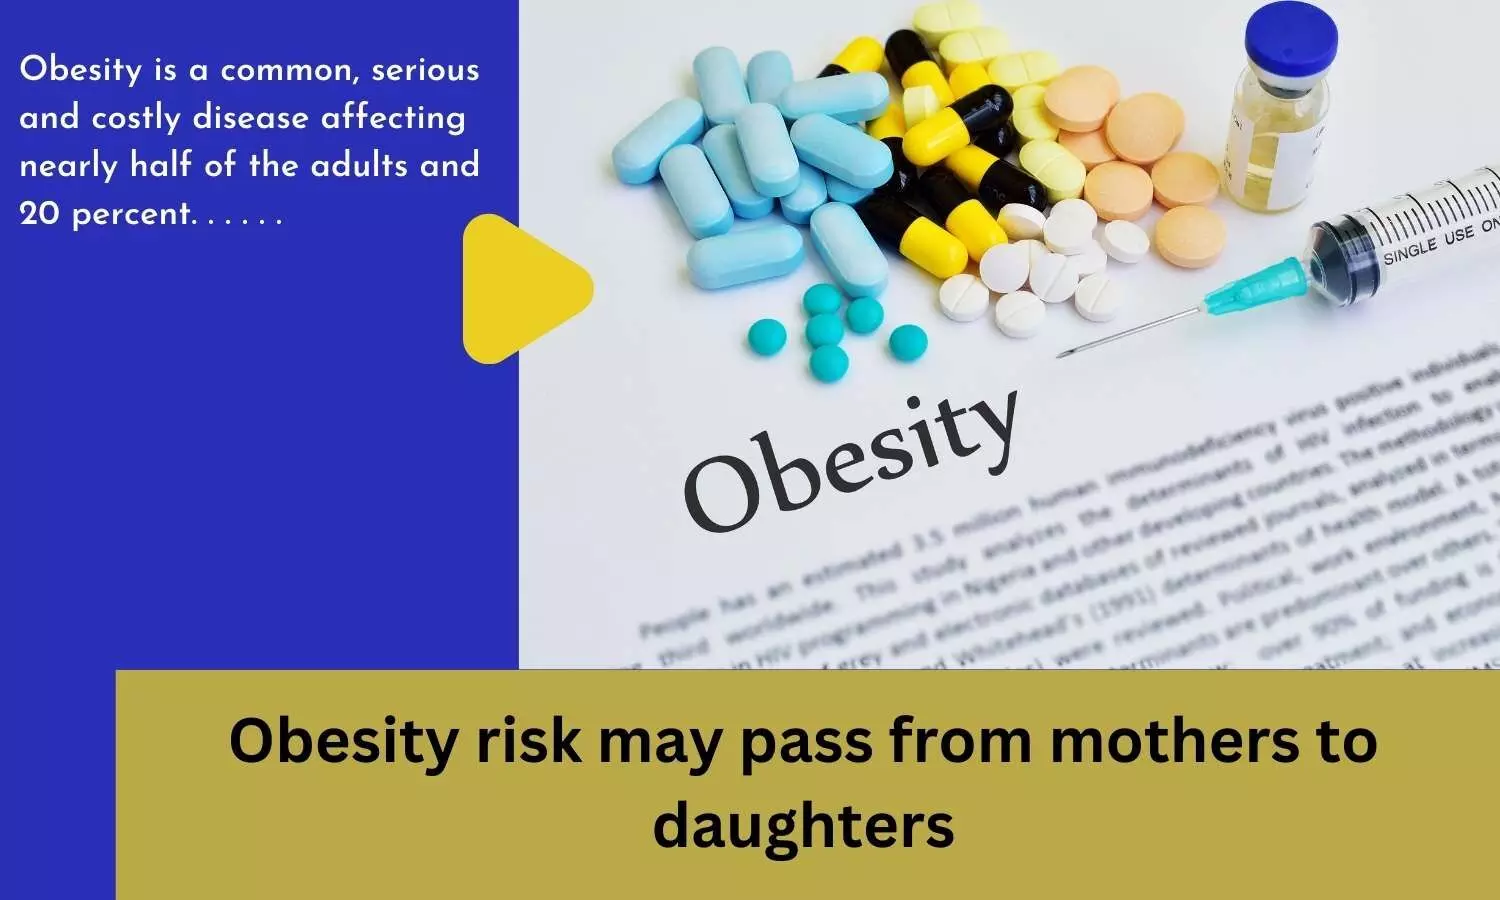 Obesity risk may pass from mothers to daughters